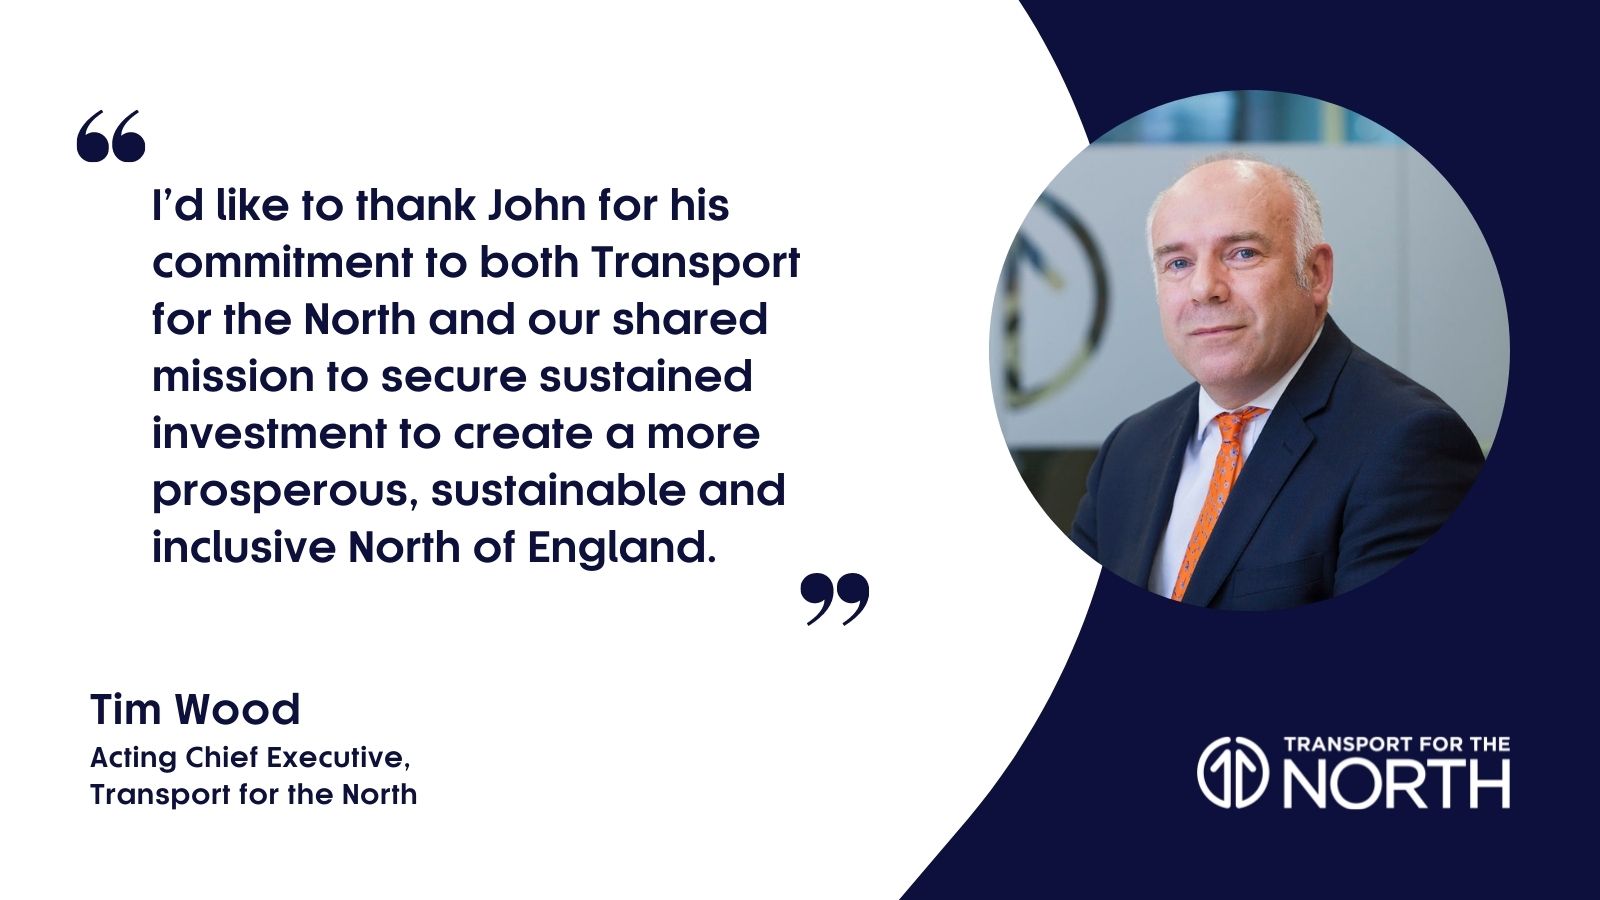 Tim Wood, Acting Chief Executive at Transport for the North comments on John Cridland standing down as chairman